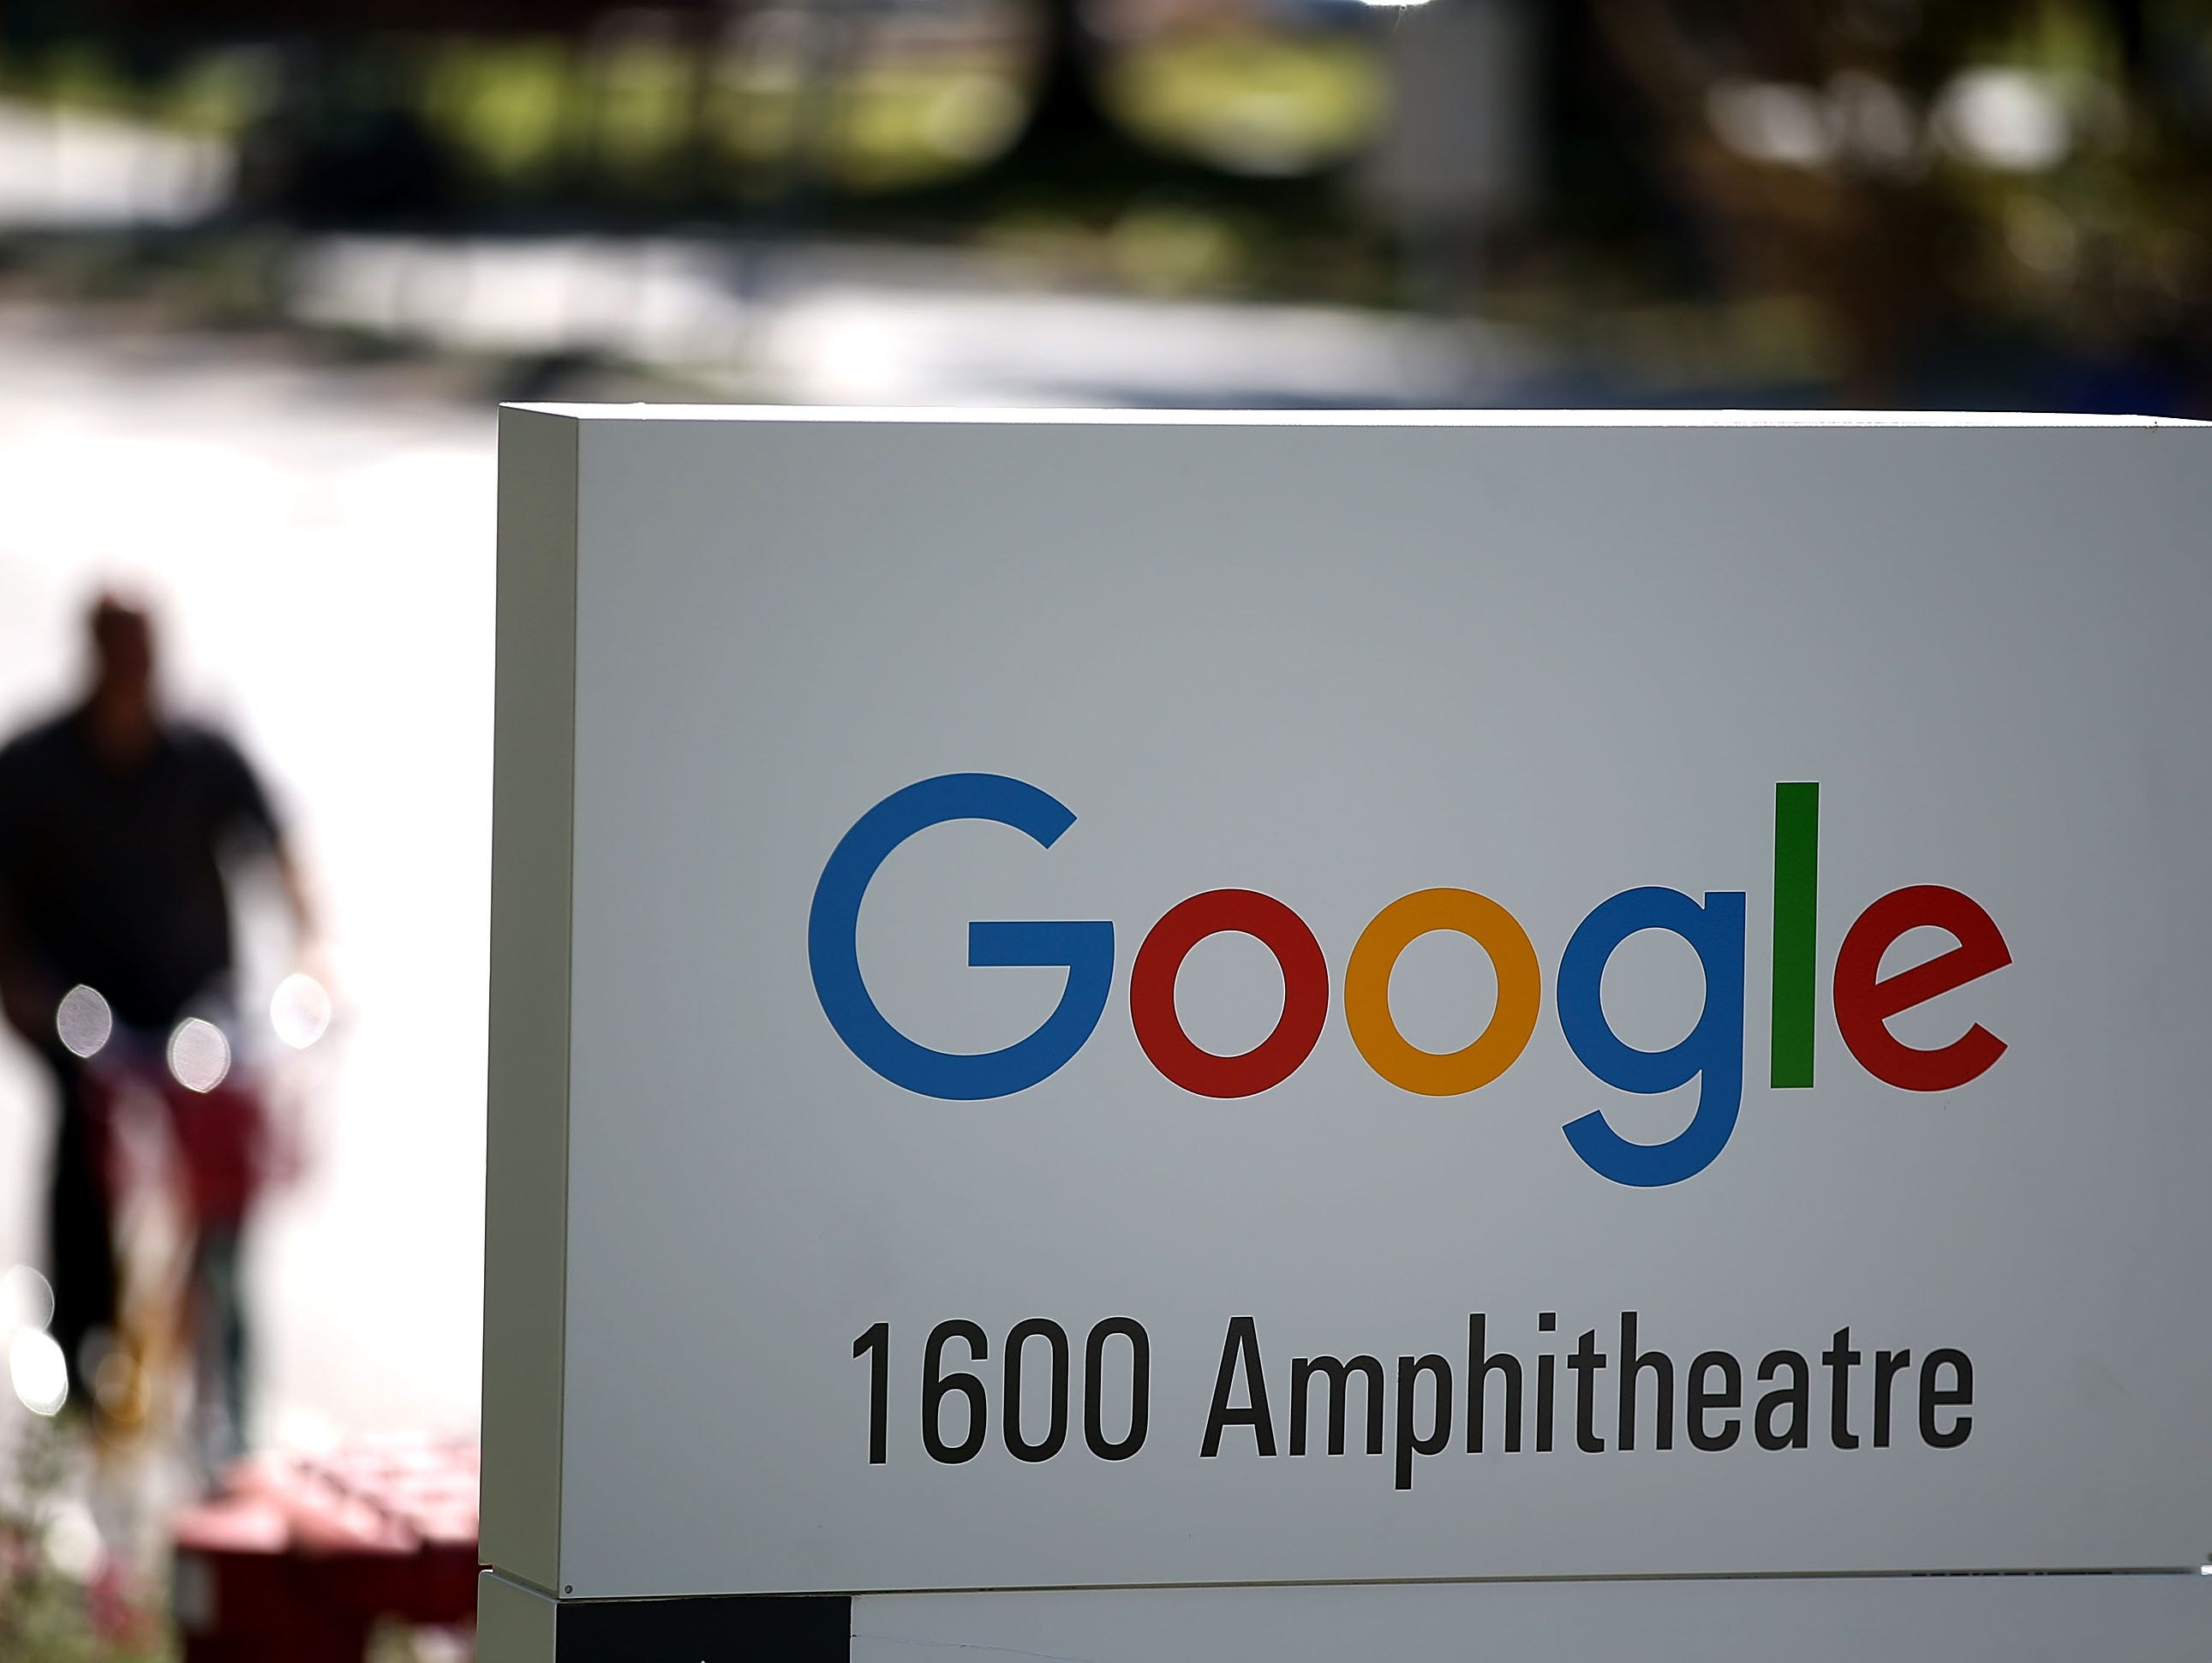 The new Google logo is displayed on a sign outside of the Google headquarters on September 2, 2015 in Mountain View, California.